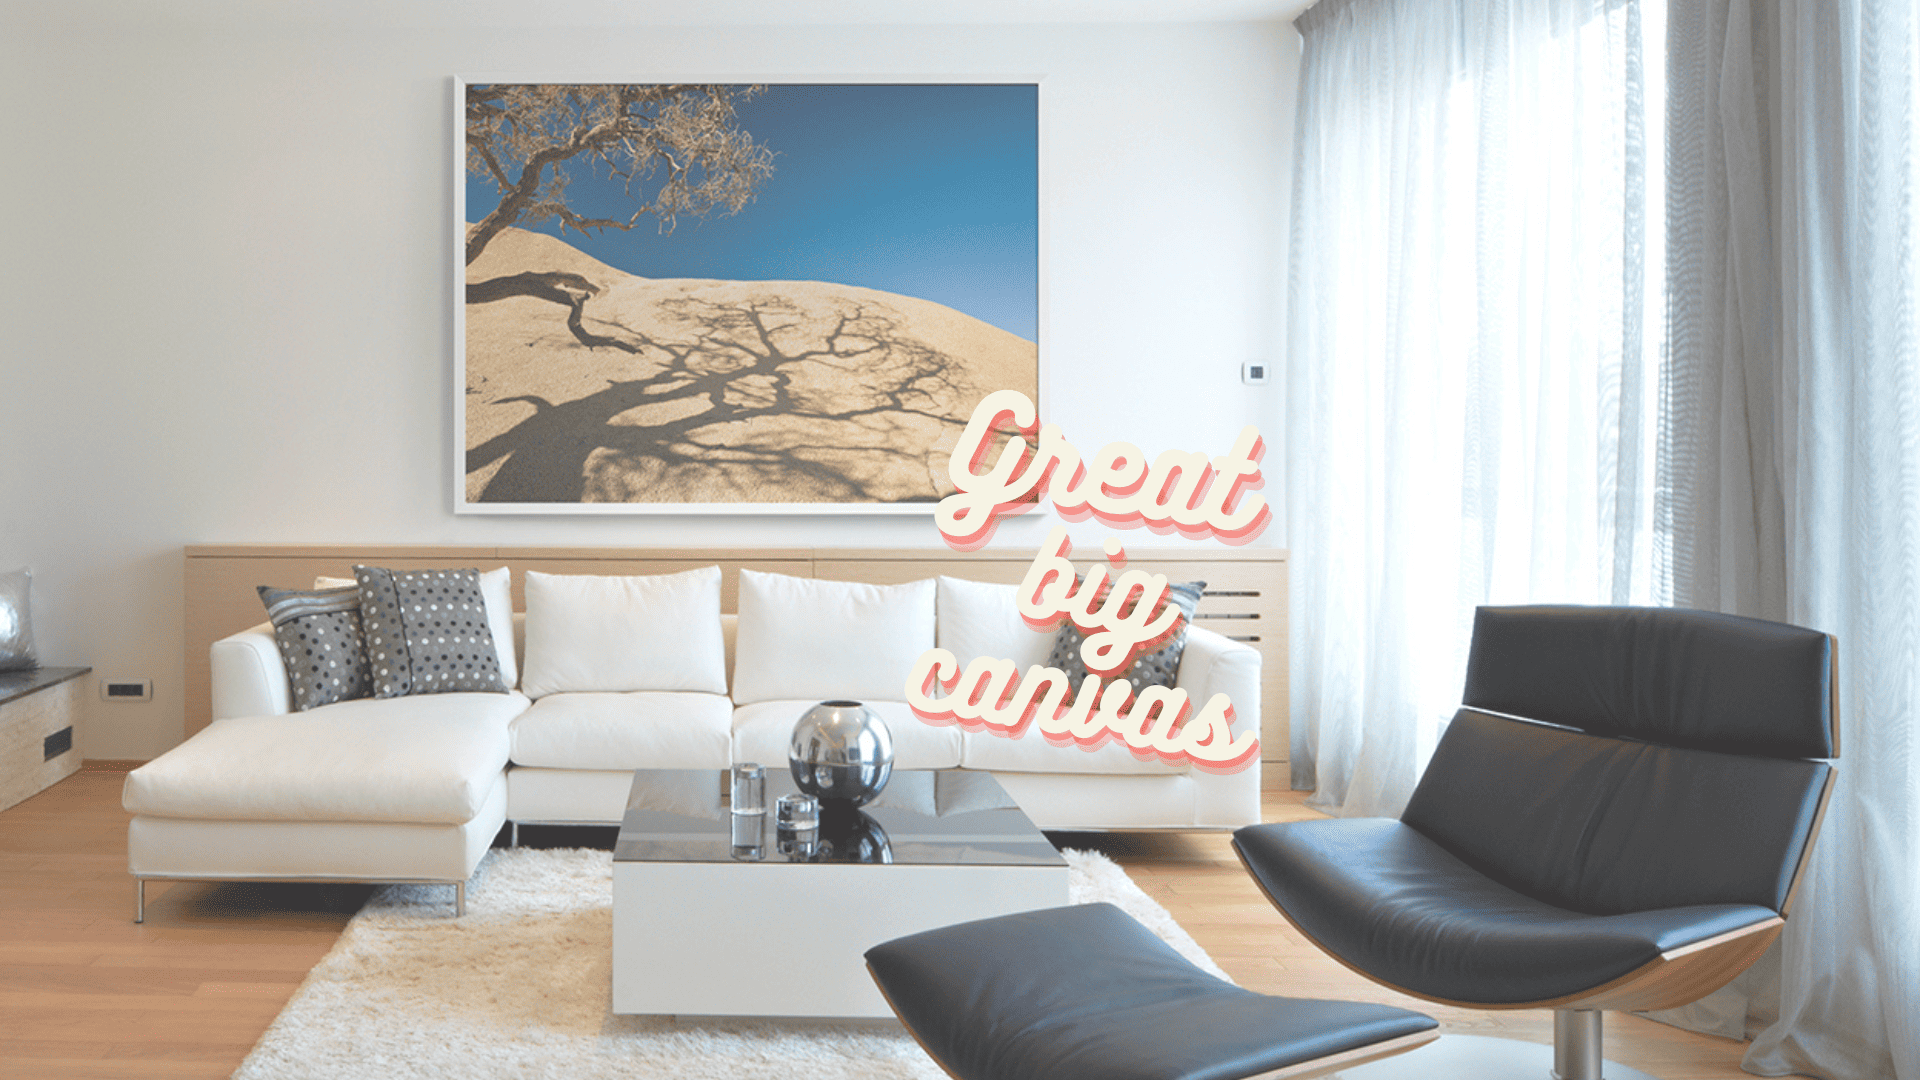 Great Big Canvas Ideas For Living Room And Bedroom - 365Canvas Blog